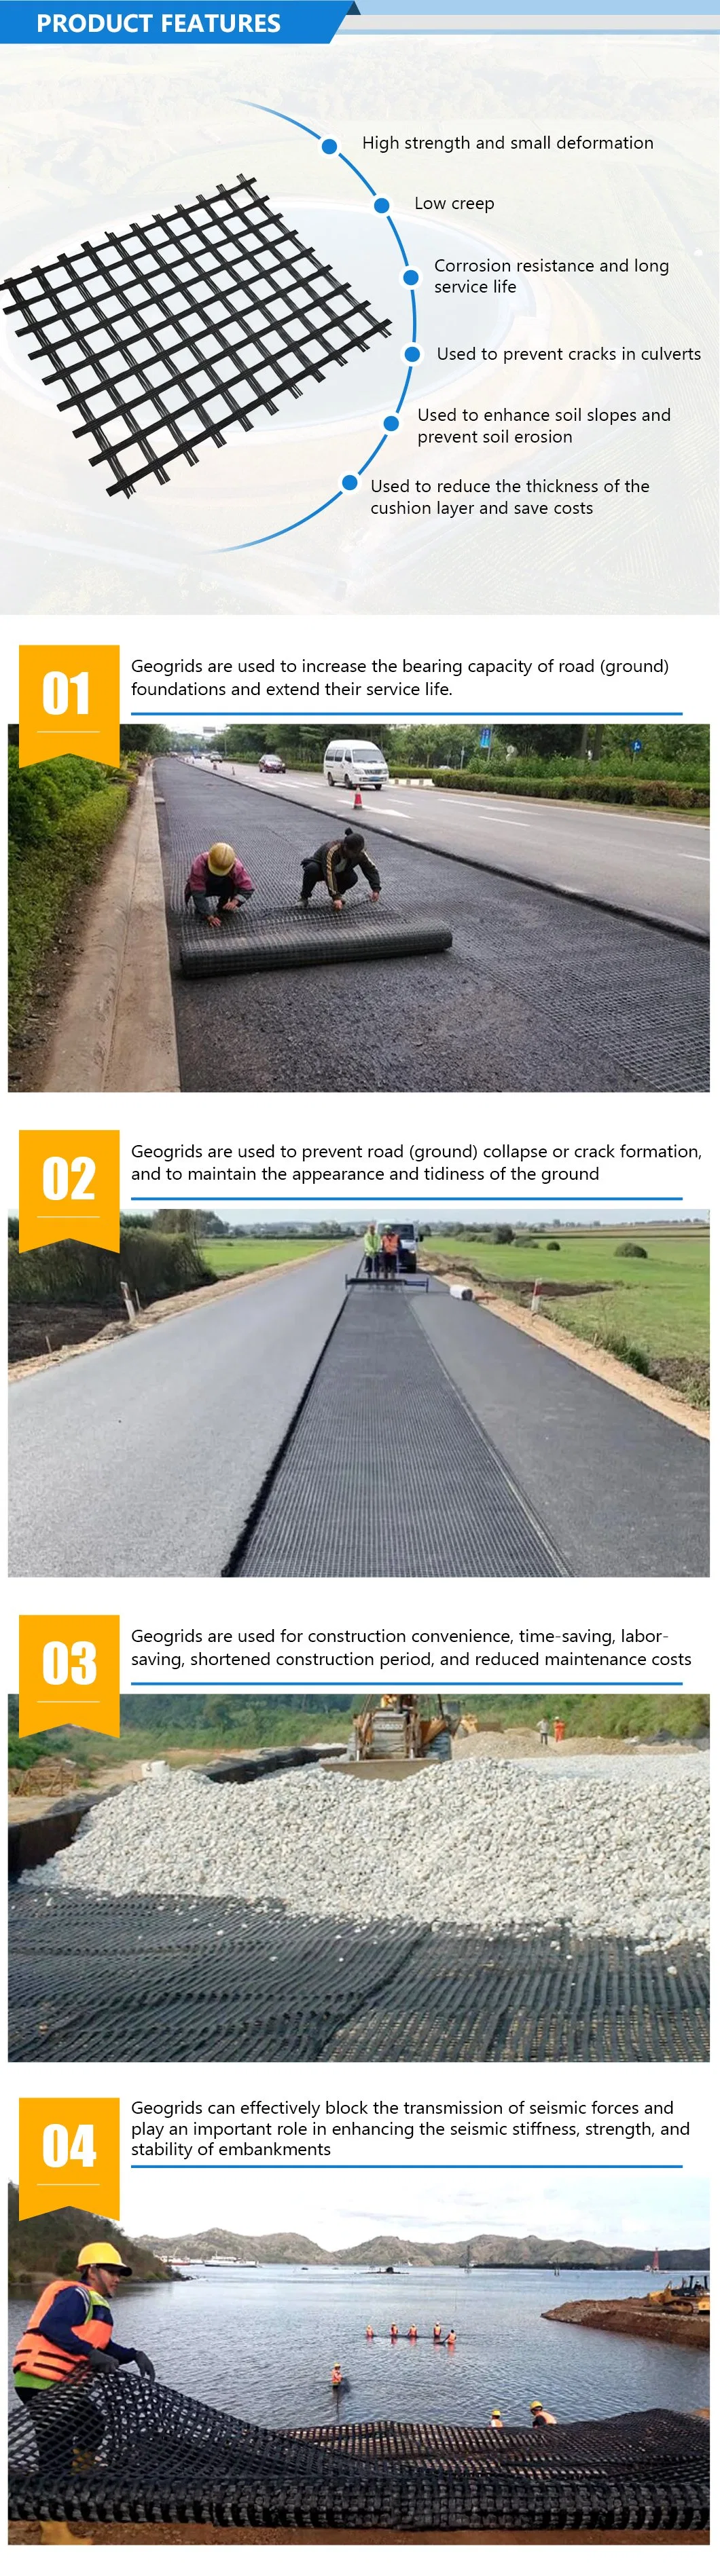 Customzied 70kn Steel Plastic Biaxial Geogrid Manufacturer for Dam and Roadbed/Slope Protection/Wall Reinforcement/Roadbed Bearing Capacity Improvement in Airf